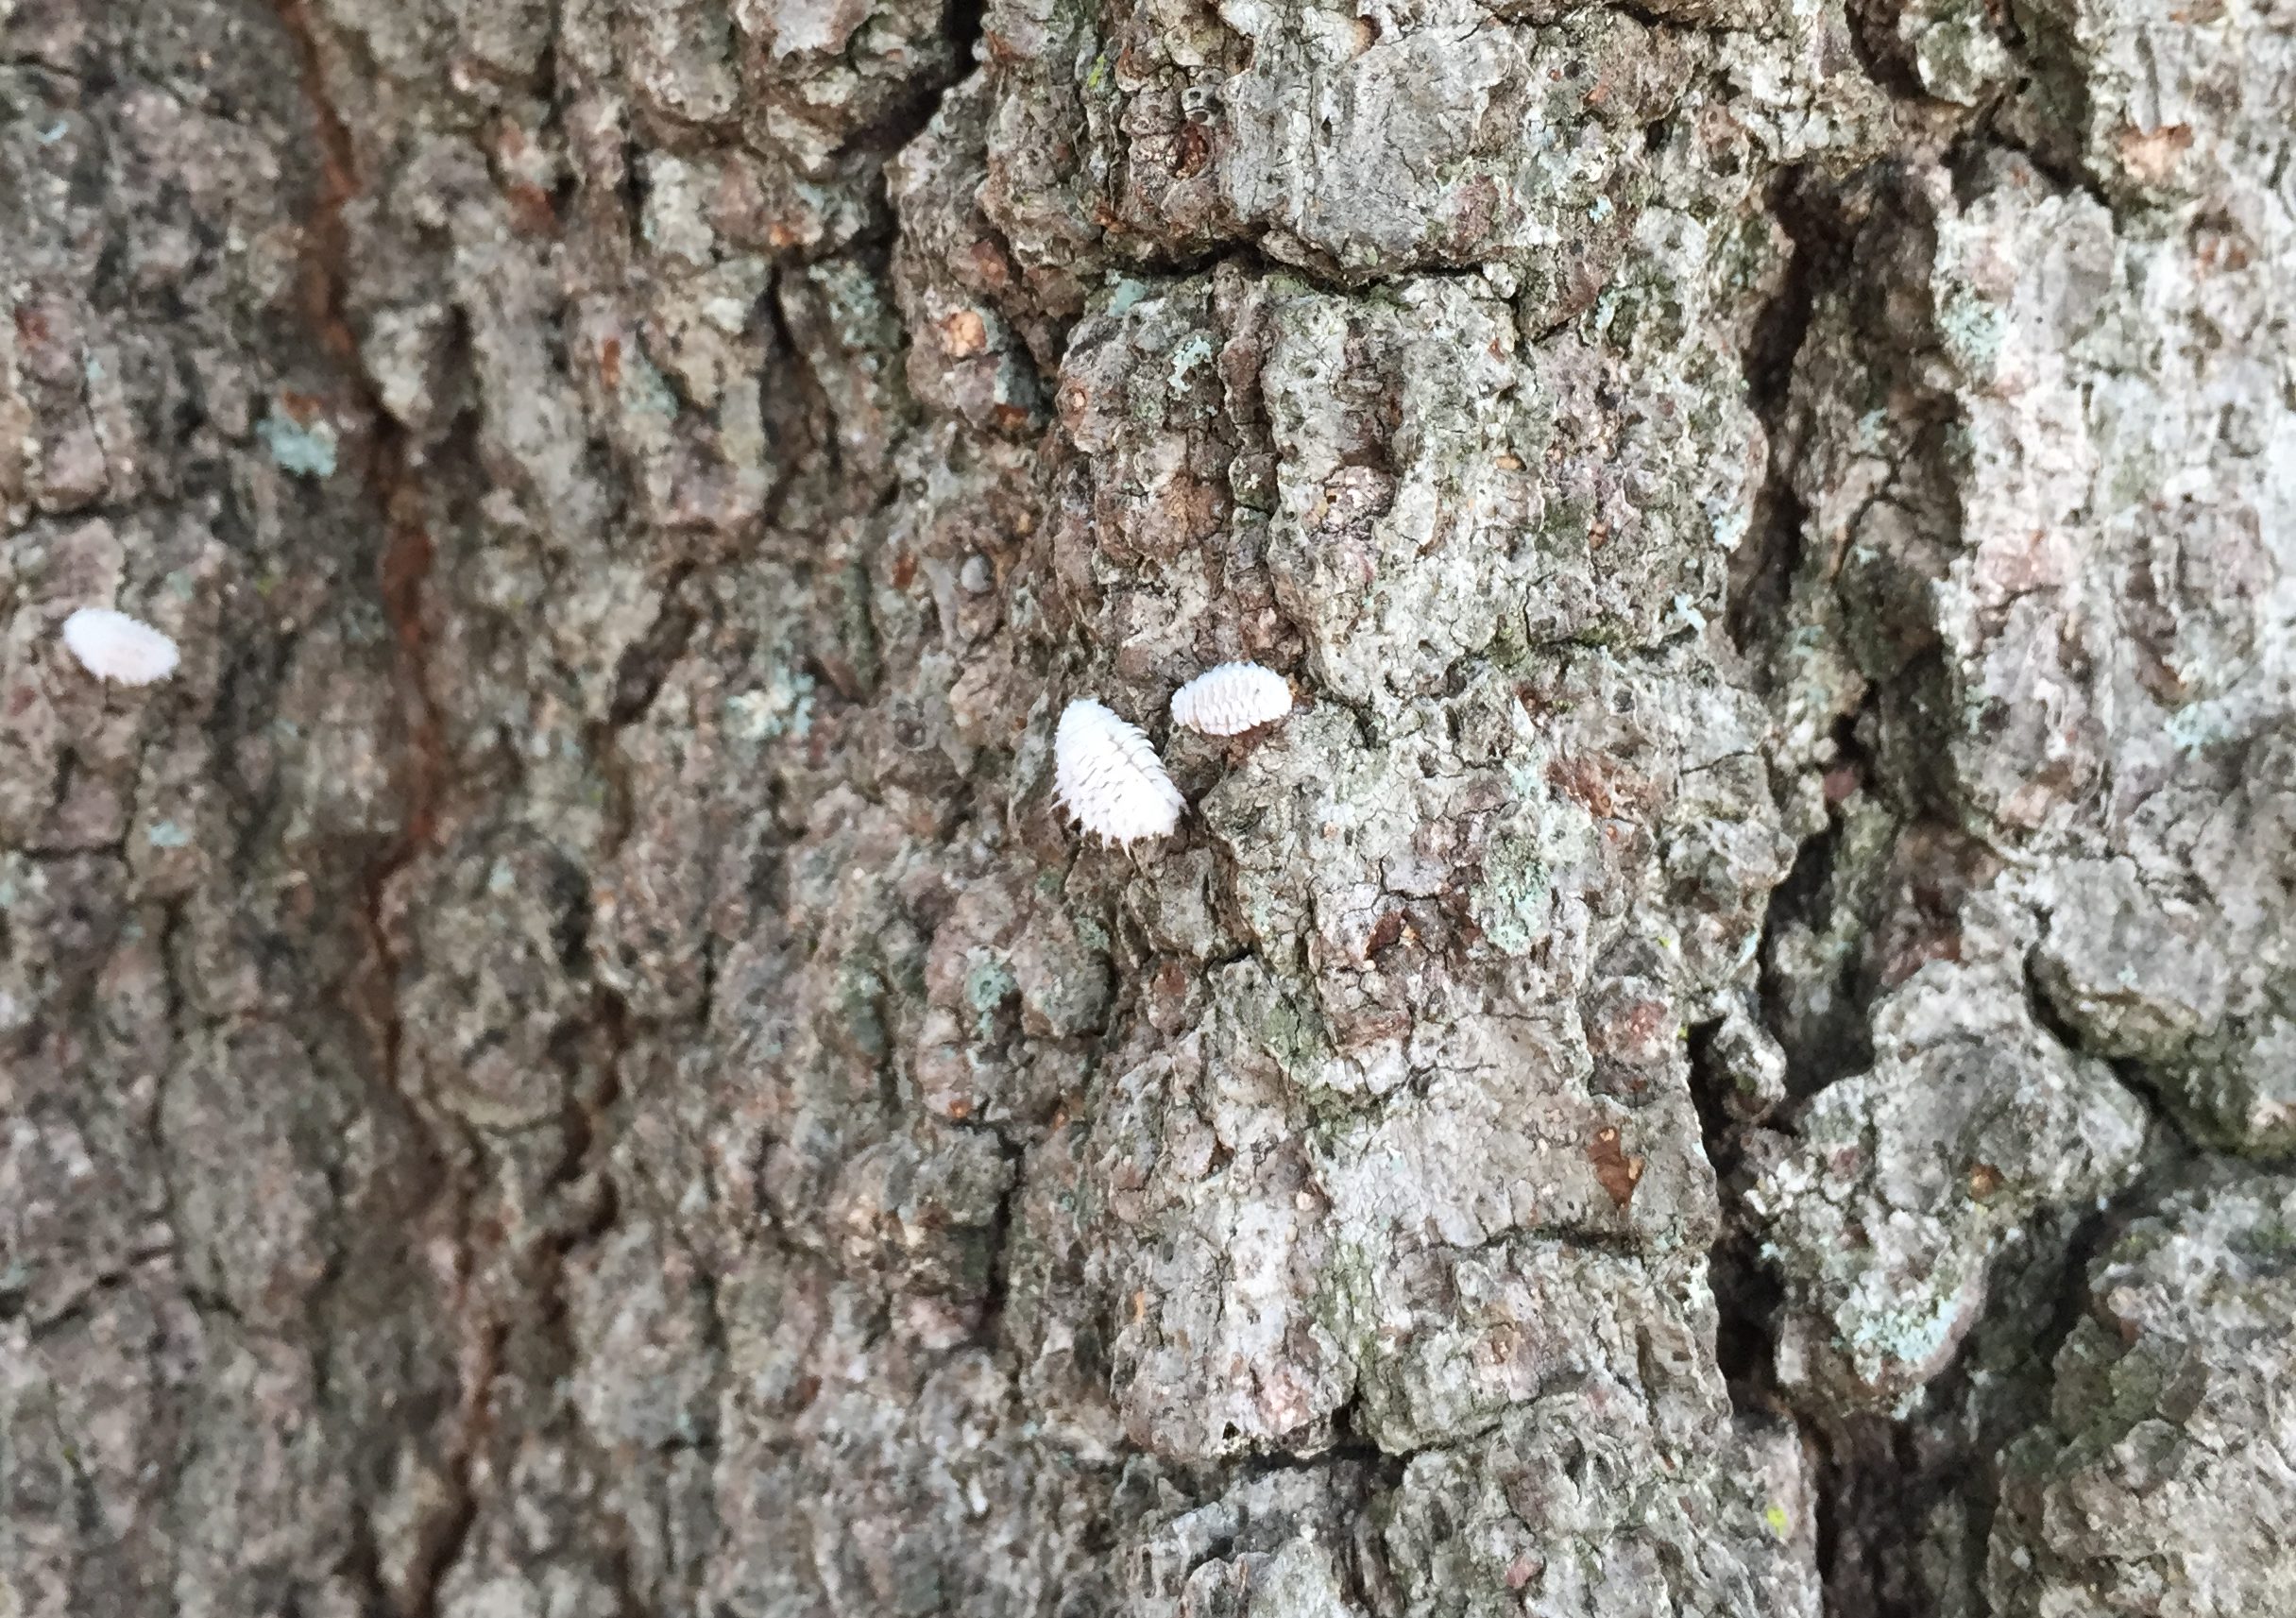 Hypoaspis spp. larvae on willow oak bark. These are larve of specialist lady beetles that eat scale insects. Photo:SD Frank